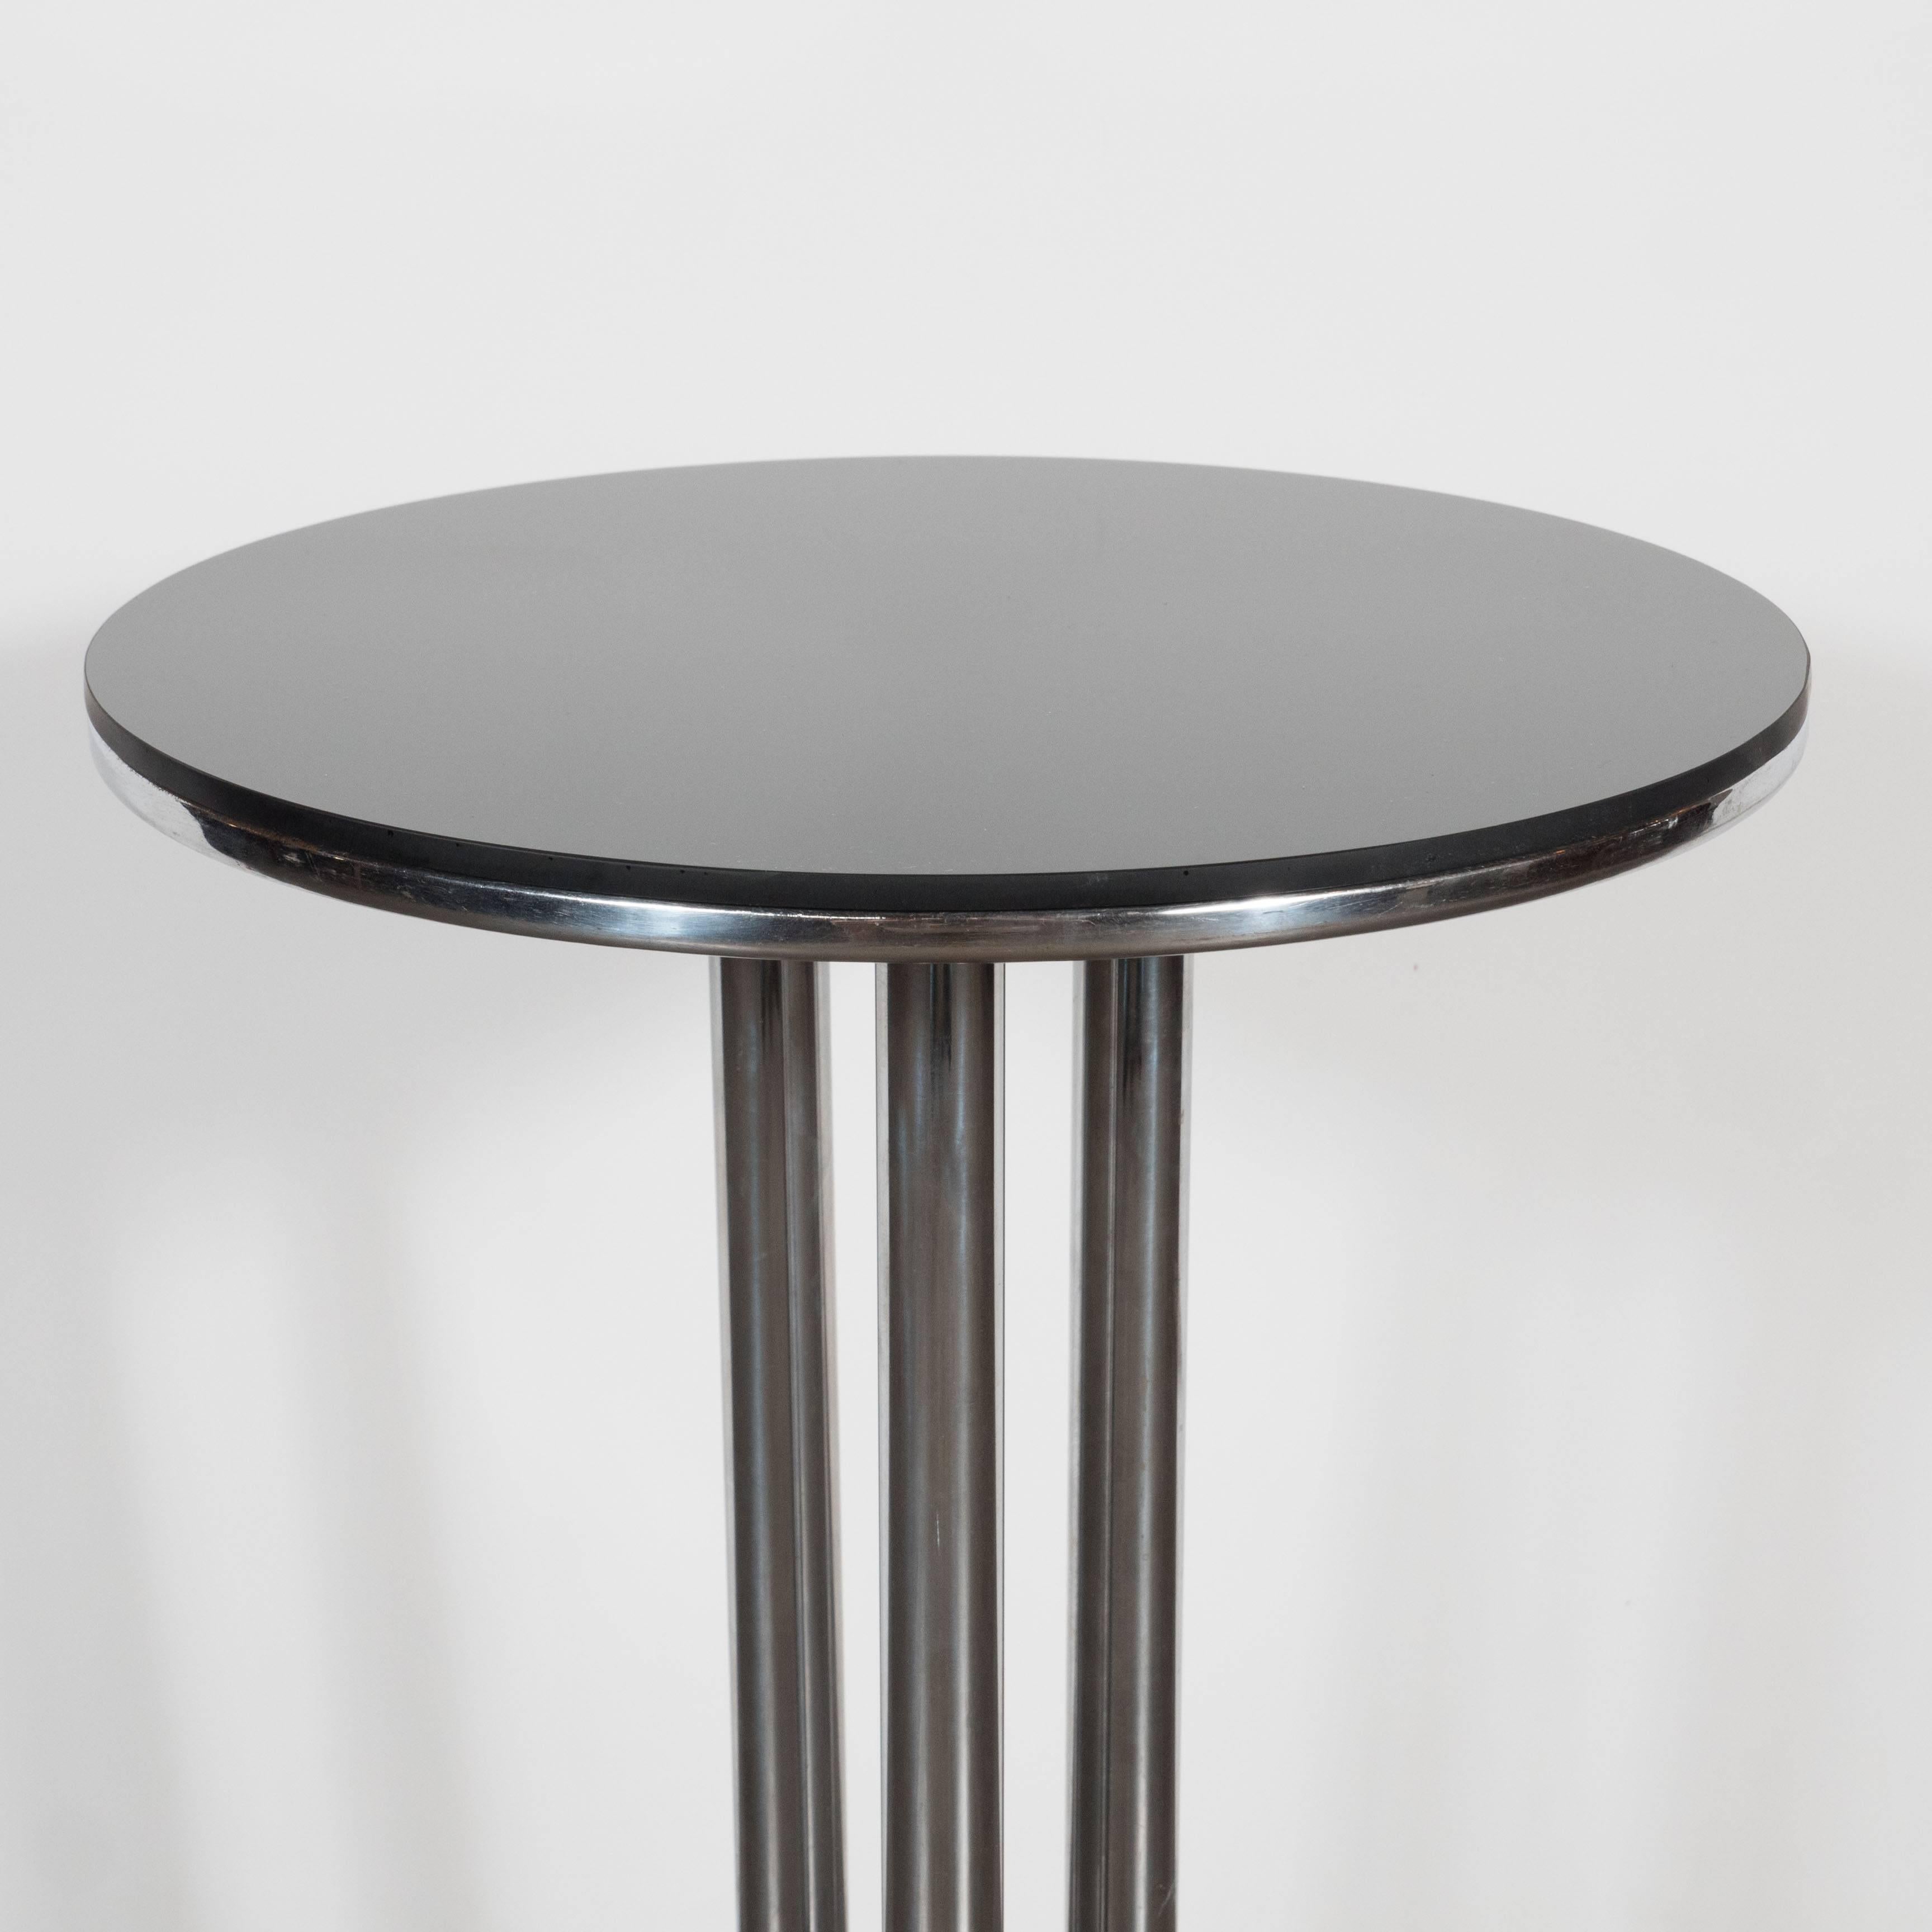 An Art Deco Machine Age drinks table in the manner of Donald Deskey featuring a column form stem on a skyscraper base in chrome and black enamel with a vitrolite top. A stylish versatile table that can be moved around with ease. An incredible